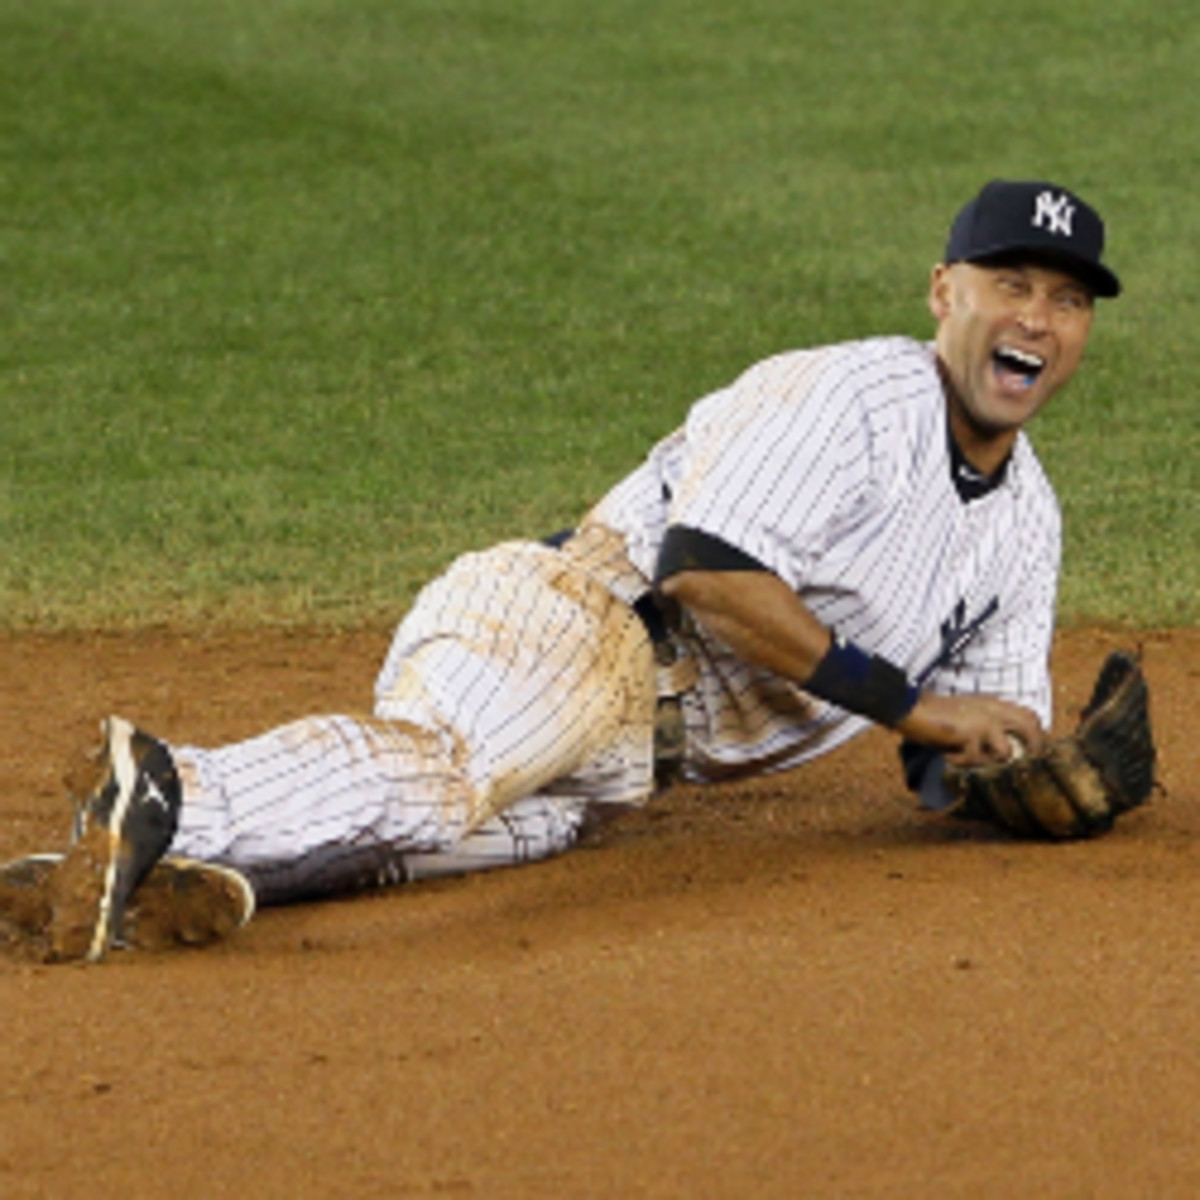 Derek Jeter out for the year with ankle injury – The Denver Post